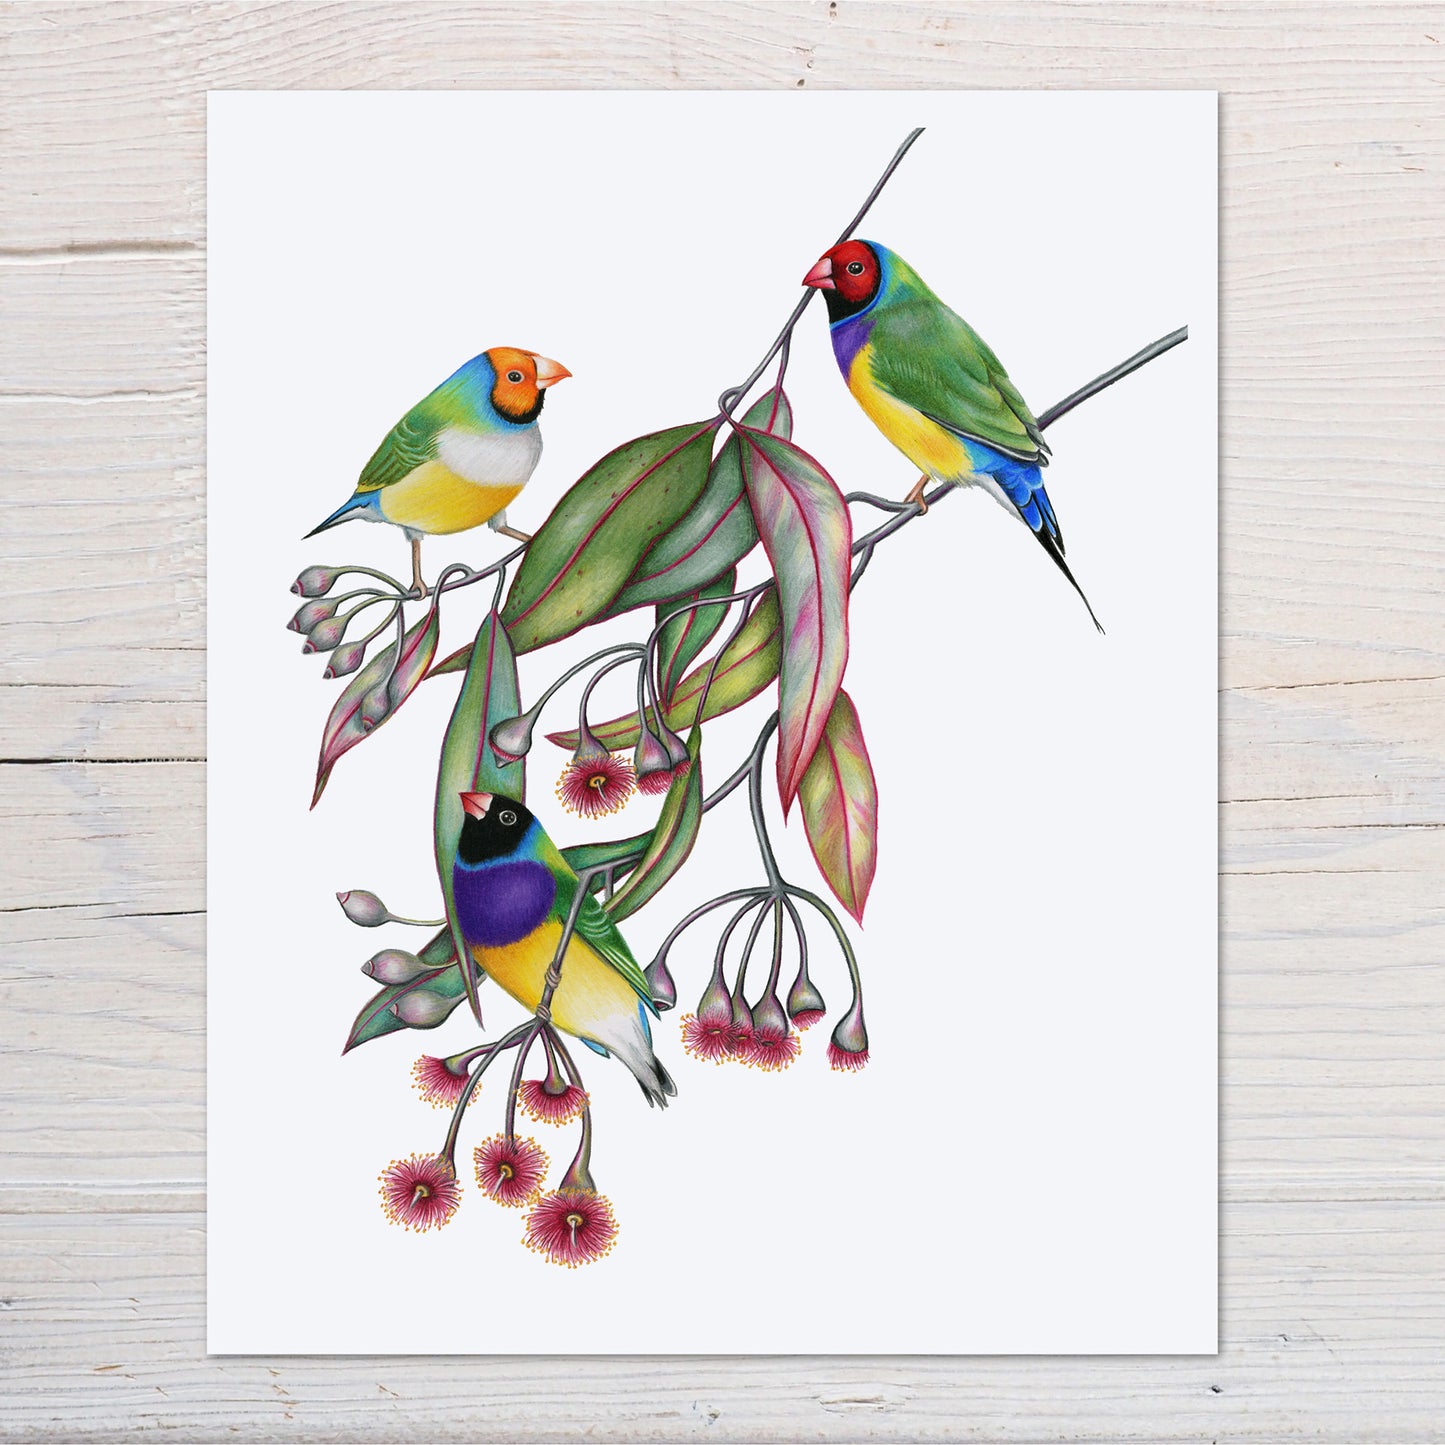 Hand drawn pencil art of Gouldian finches in a eucalyptus tree by Rachel Diaz-Bastin. Prints available.